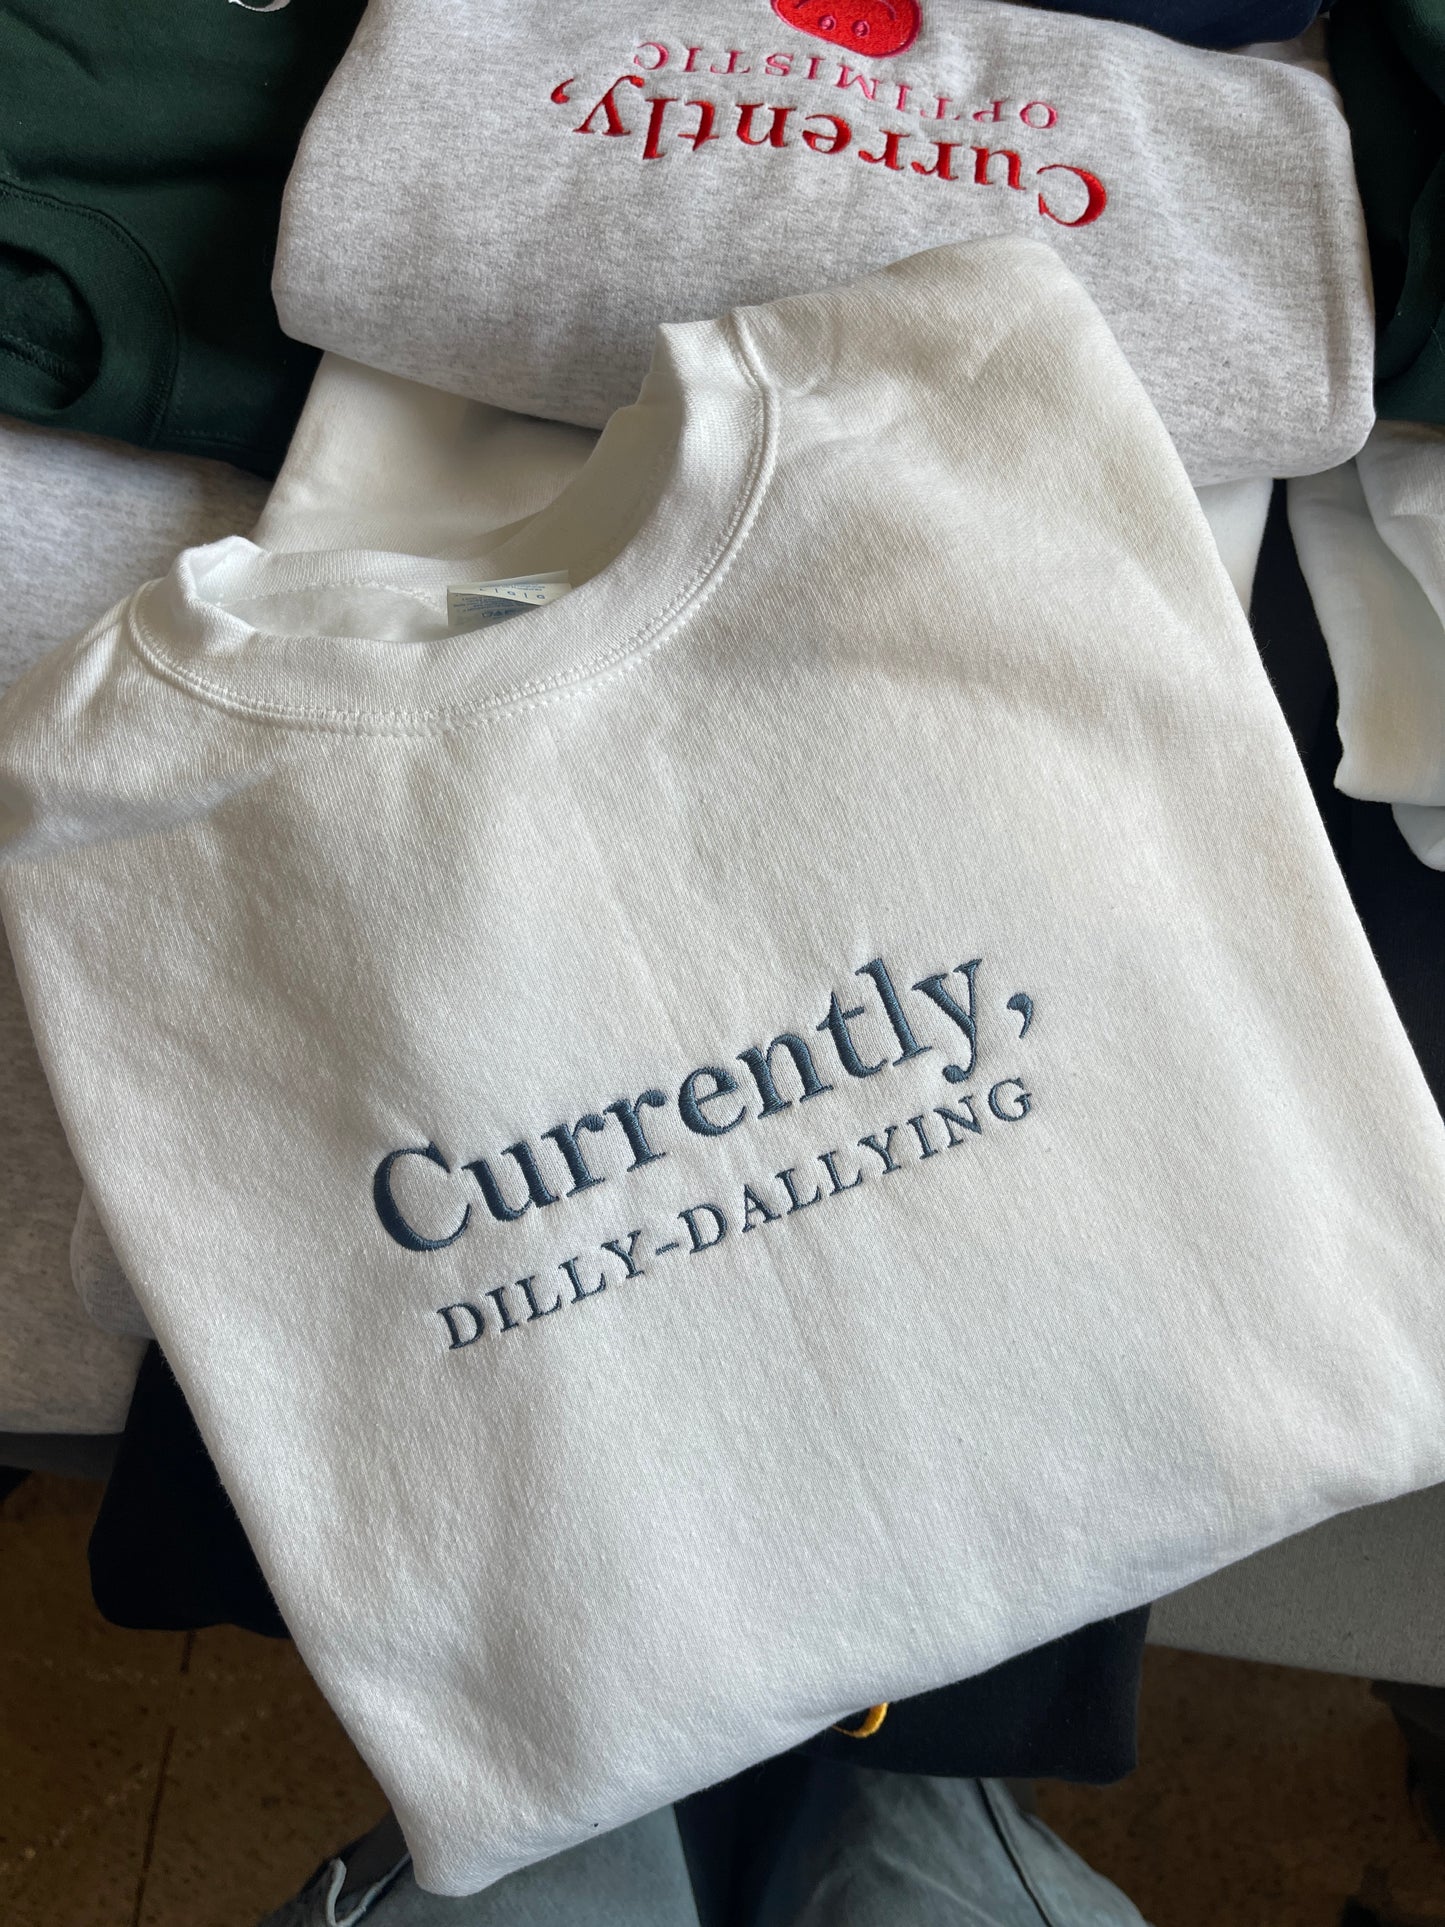 Currently, Dilly-Dallying Embroidered Sweatshirt